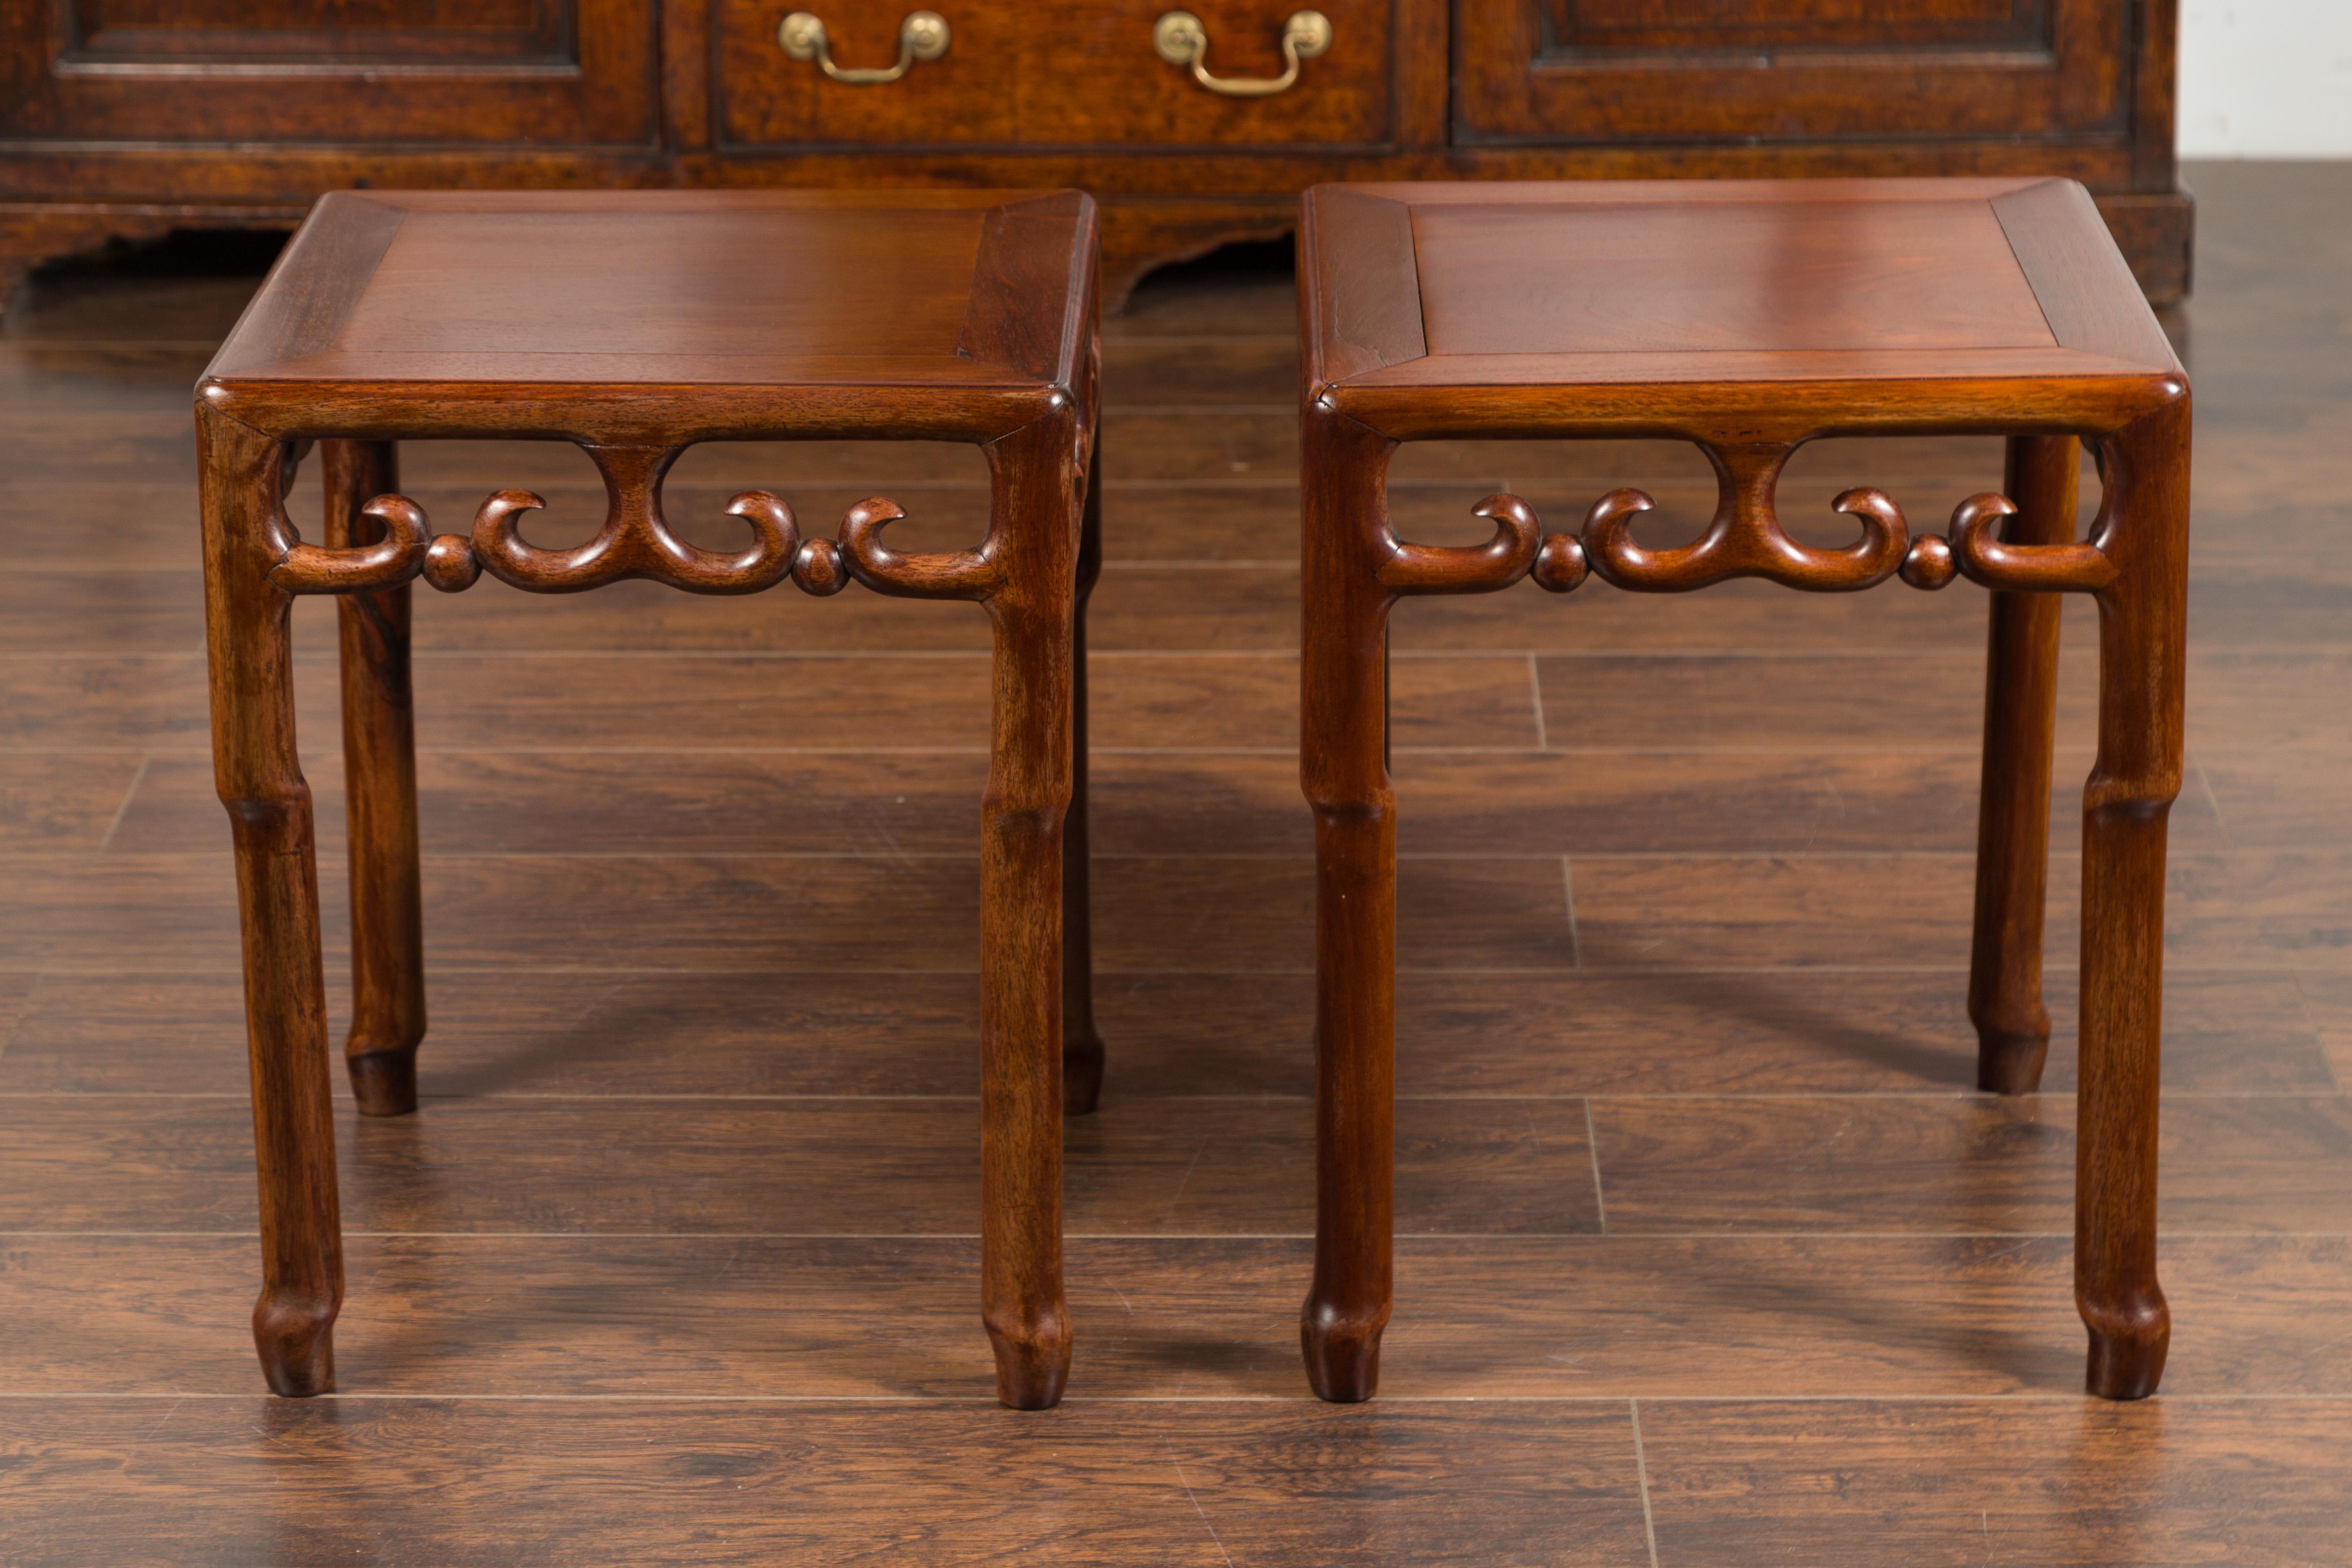 Pair of Asian Midcentury Mahogany Side Tables with Scrolling Fretwork Motifs For Sale 5